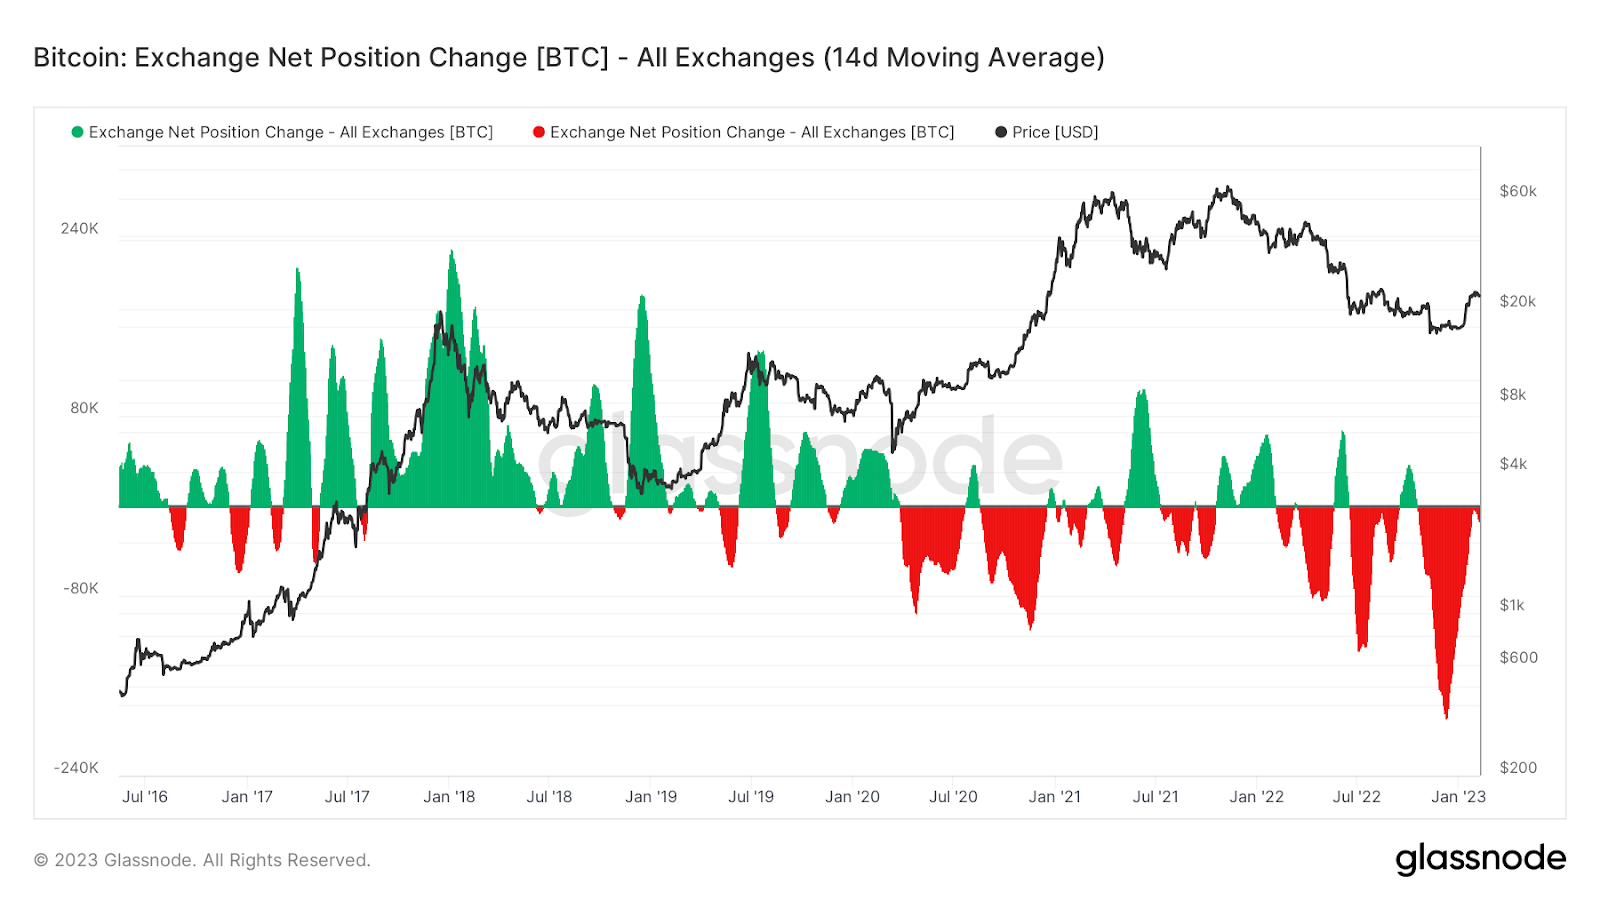 Chỉ số on-chain Bitcoin Exchange Net Position Change